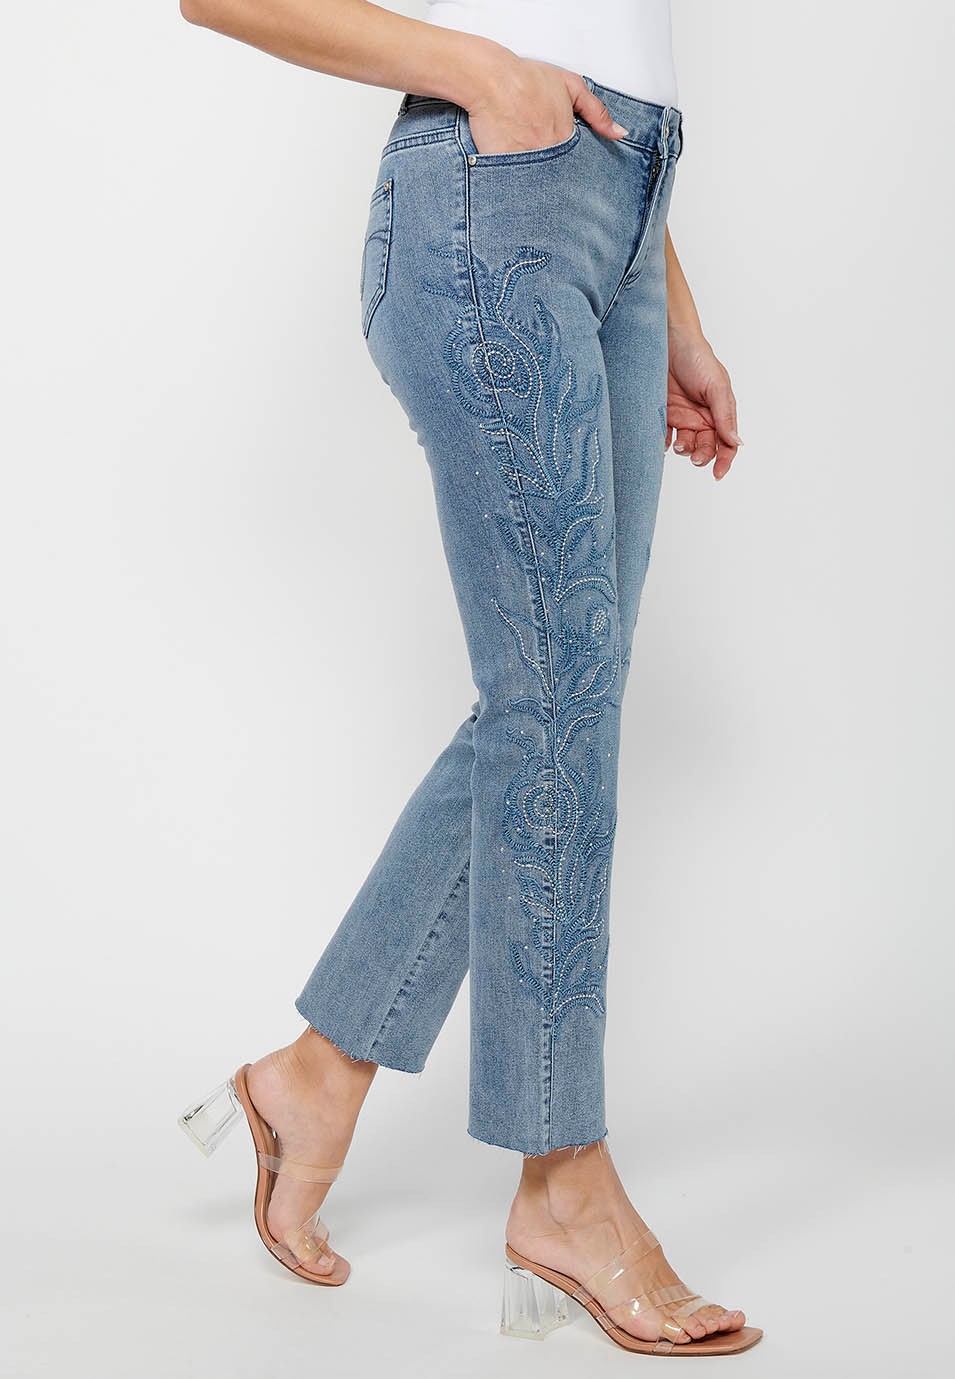 Long flared denim pants with front zipper closure and light blue floral embroidered details for women 8